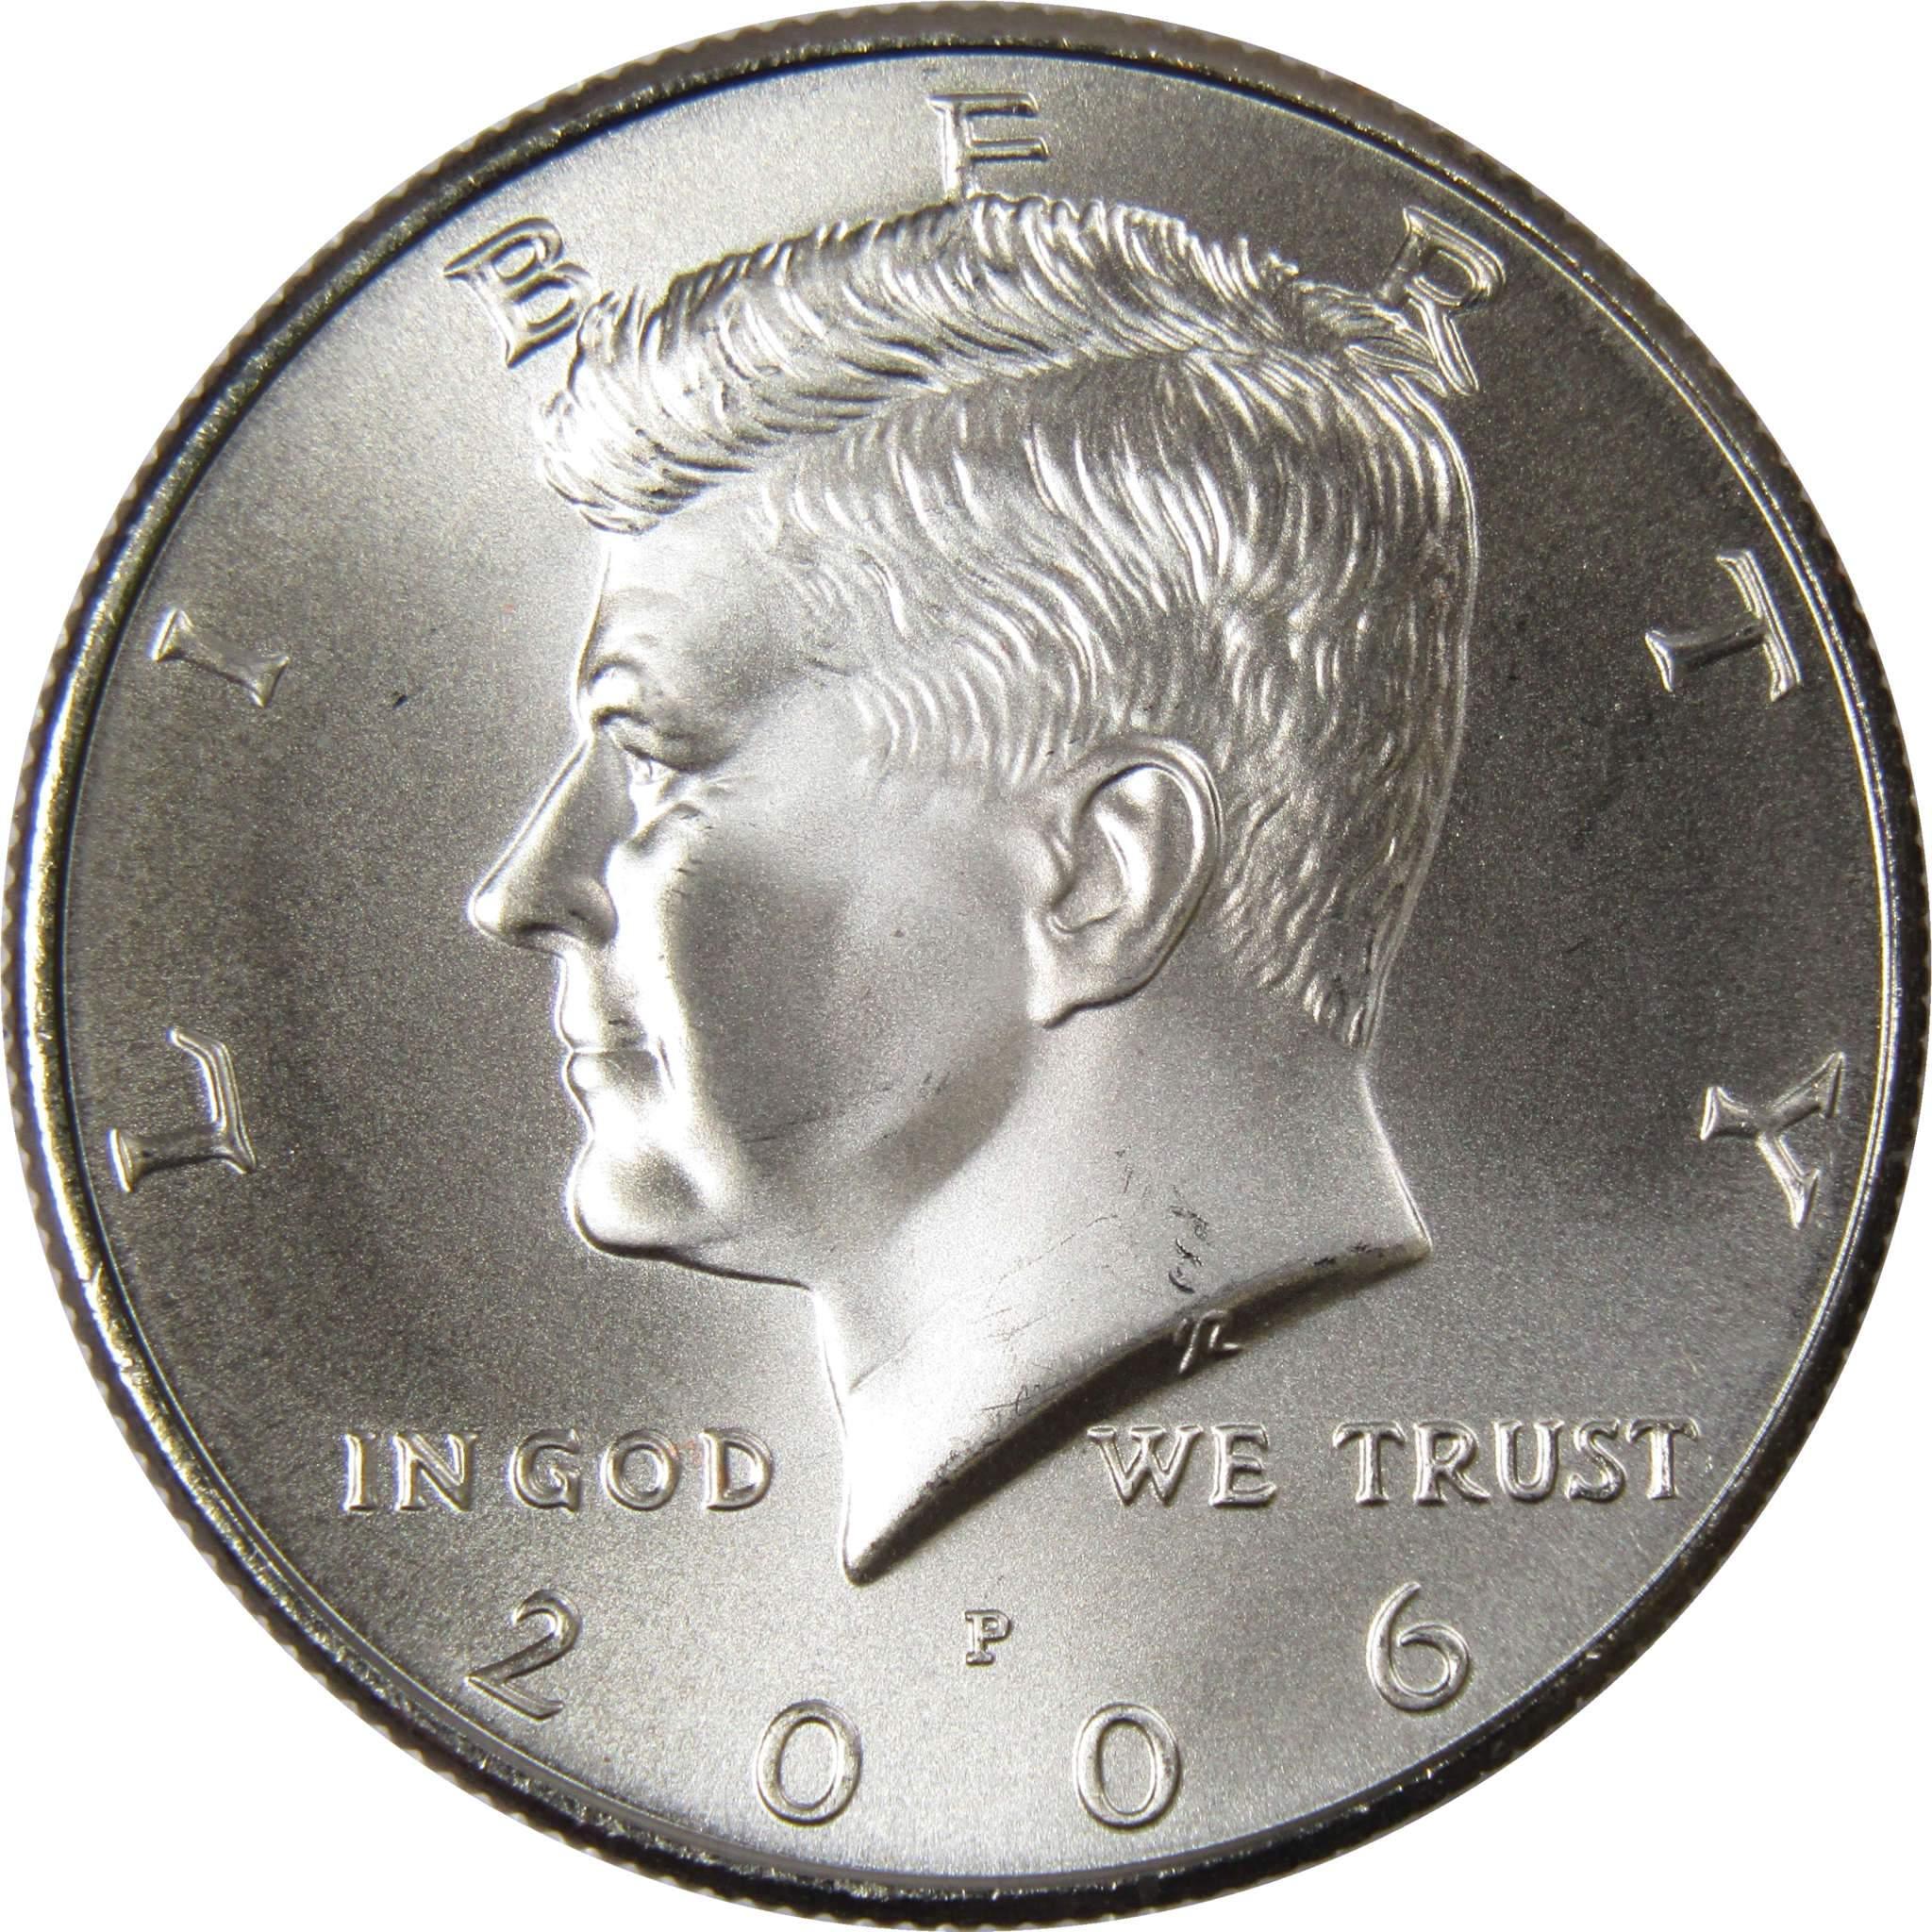 2006 P Kennedy Half Dollar BU Uncirculated Mint State 50c US Coin Collectible